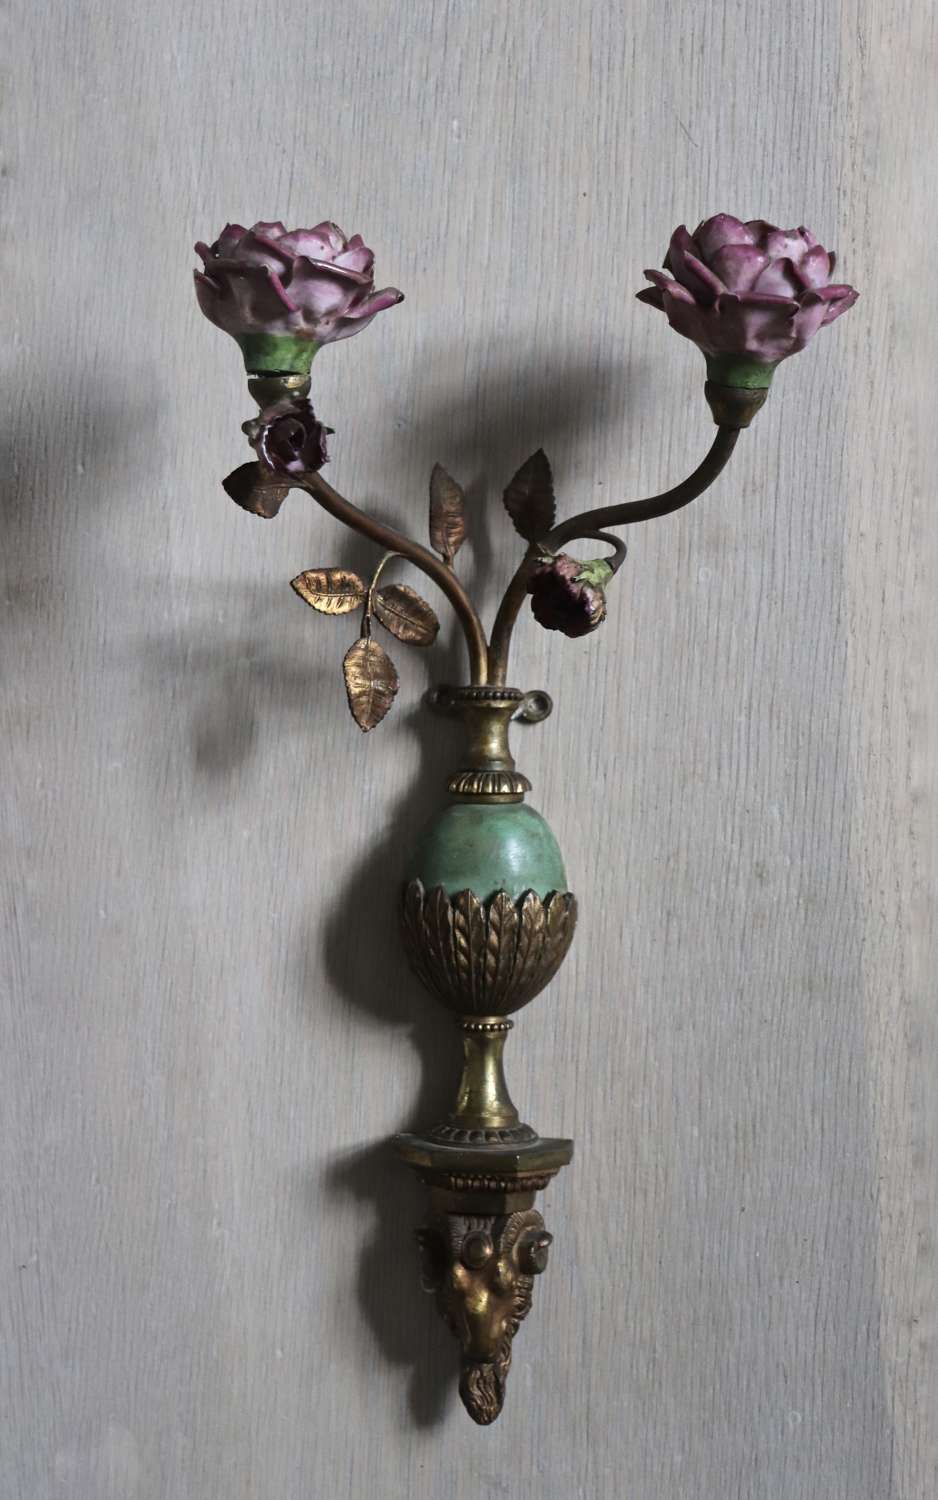 Late 19th century French porcelain and metal wall sconce